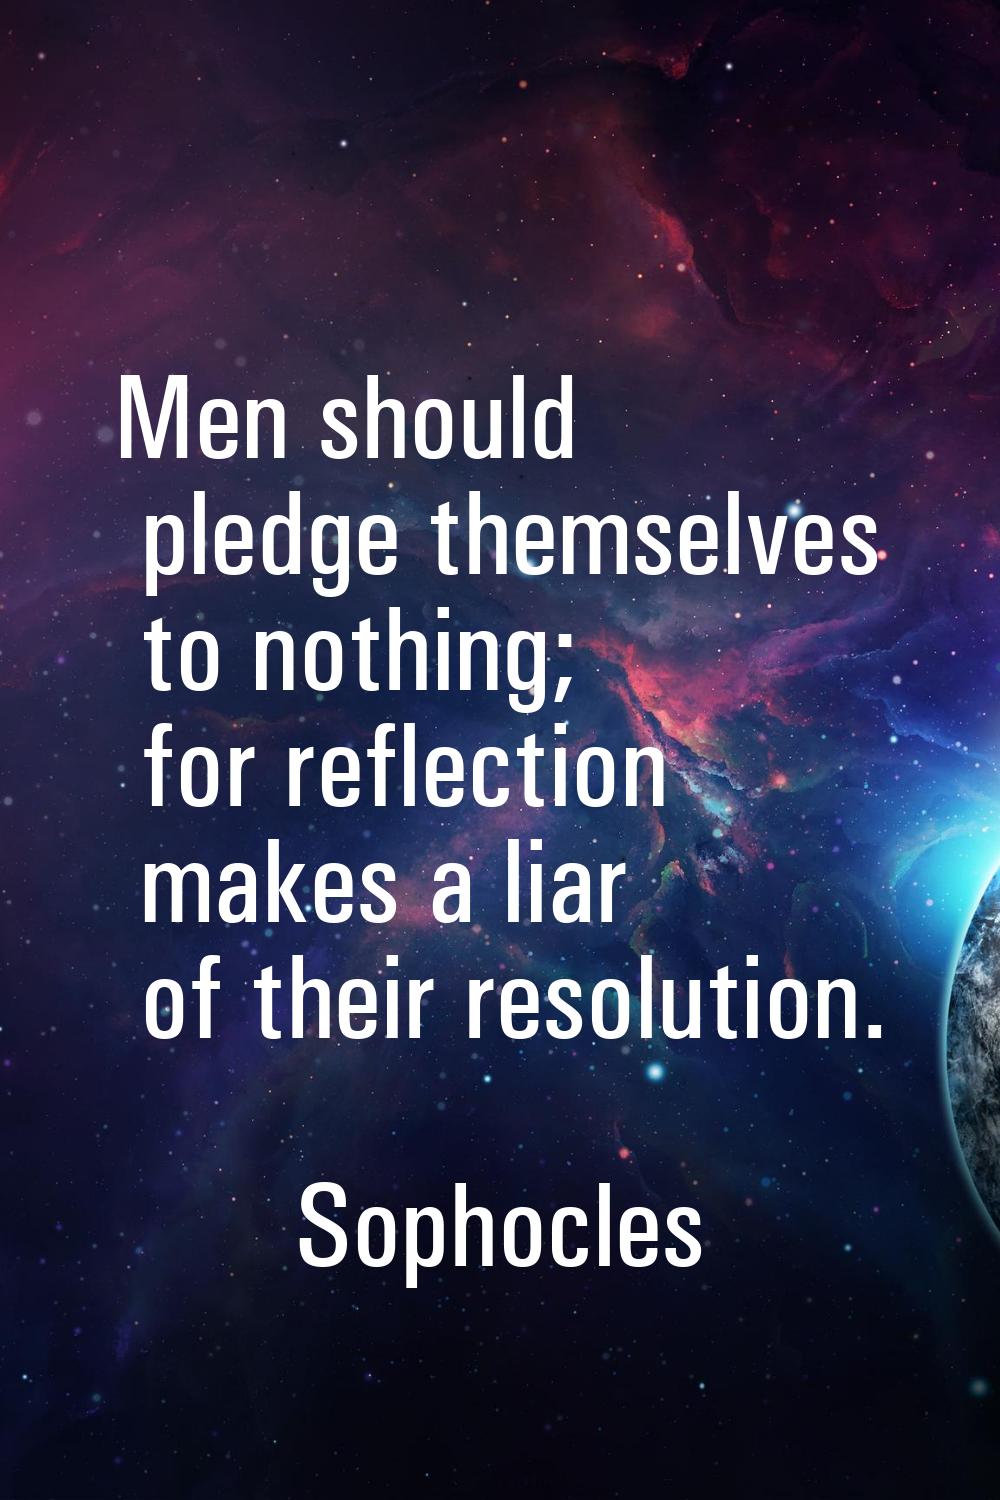 Men should pledge themselves to nothing; for reflection makes a liar of their resolution.